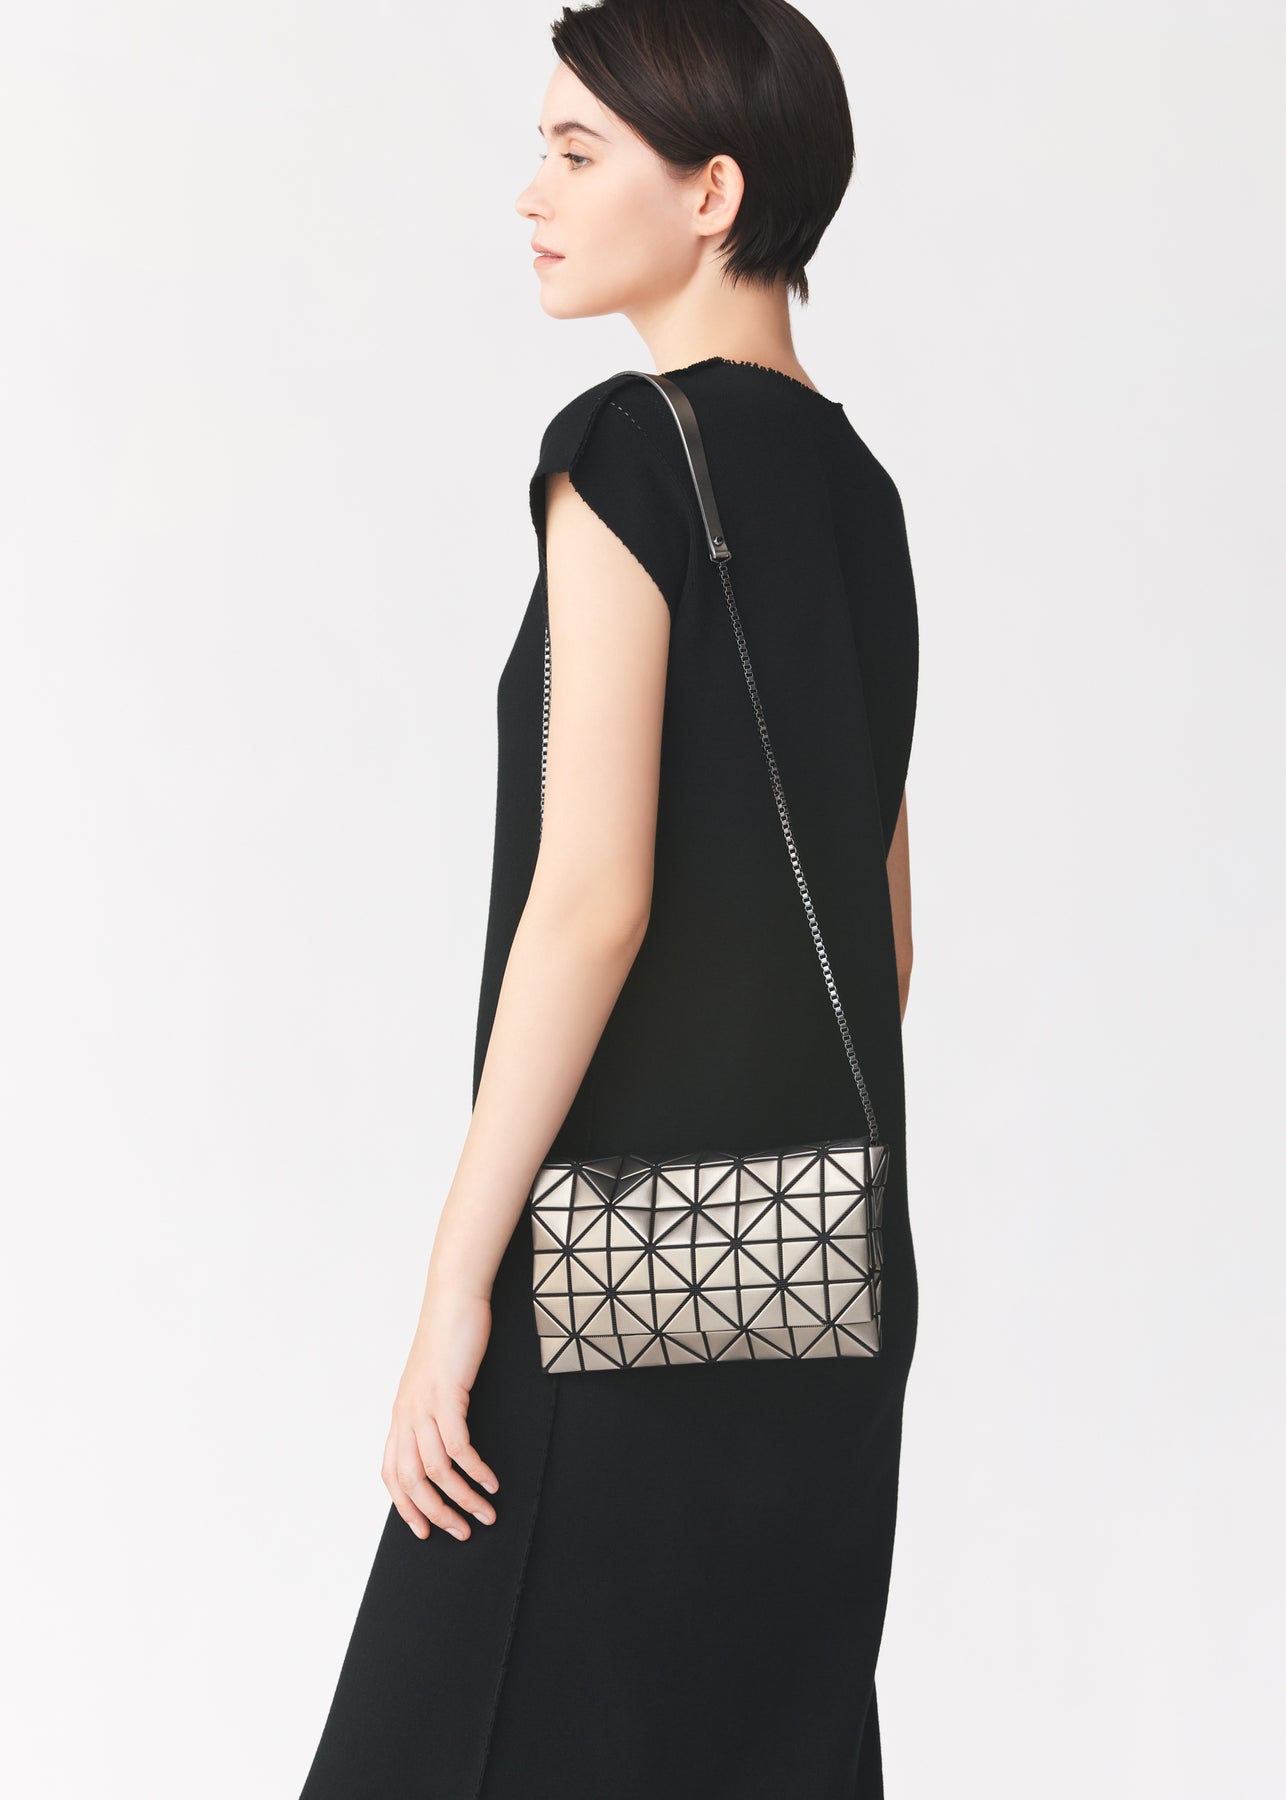 PLATINUM COFFRET CROSSBODY BAG, The official ISSEY MIYAKE ONLINE STORE